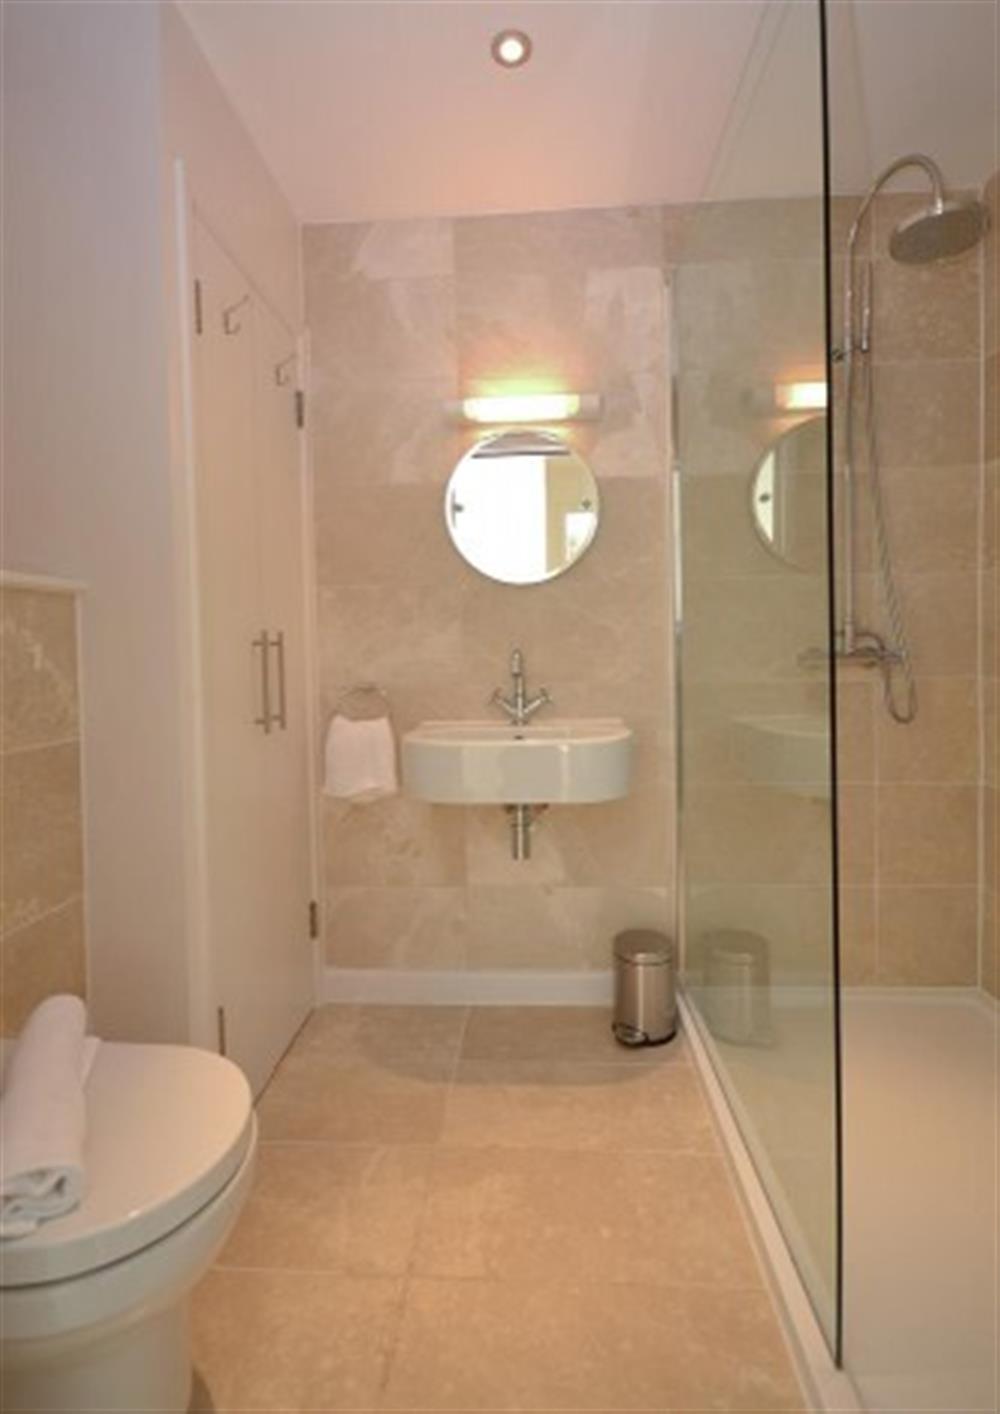 The downstairs shower room at 1 Talland in Talland Bay